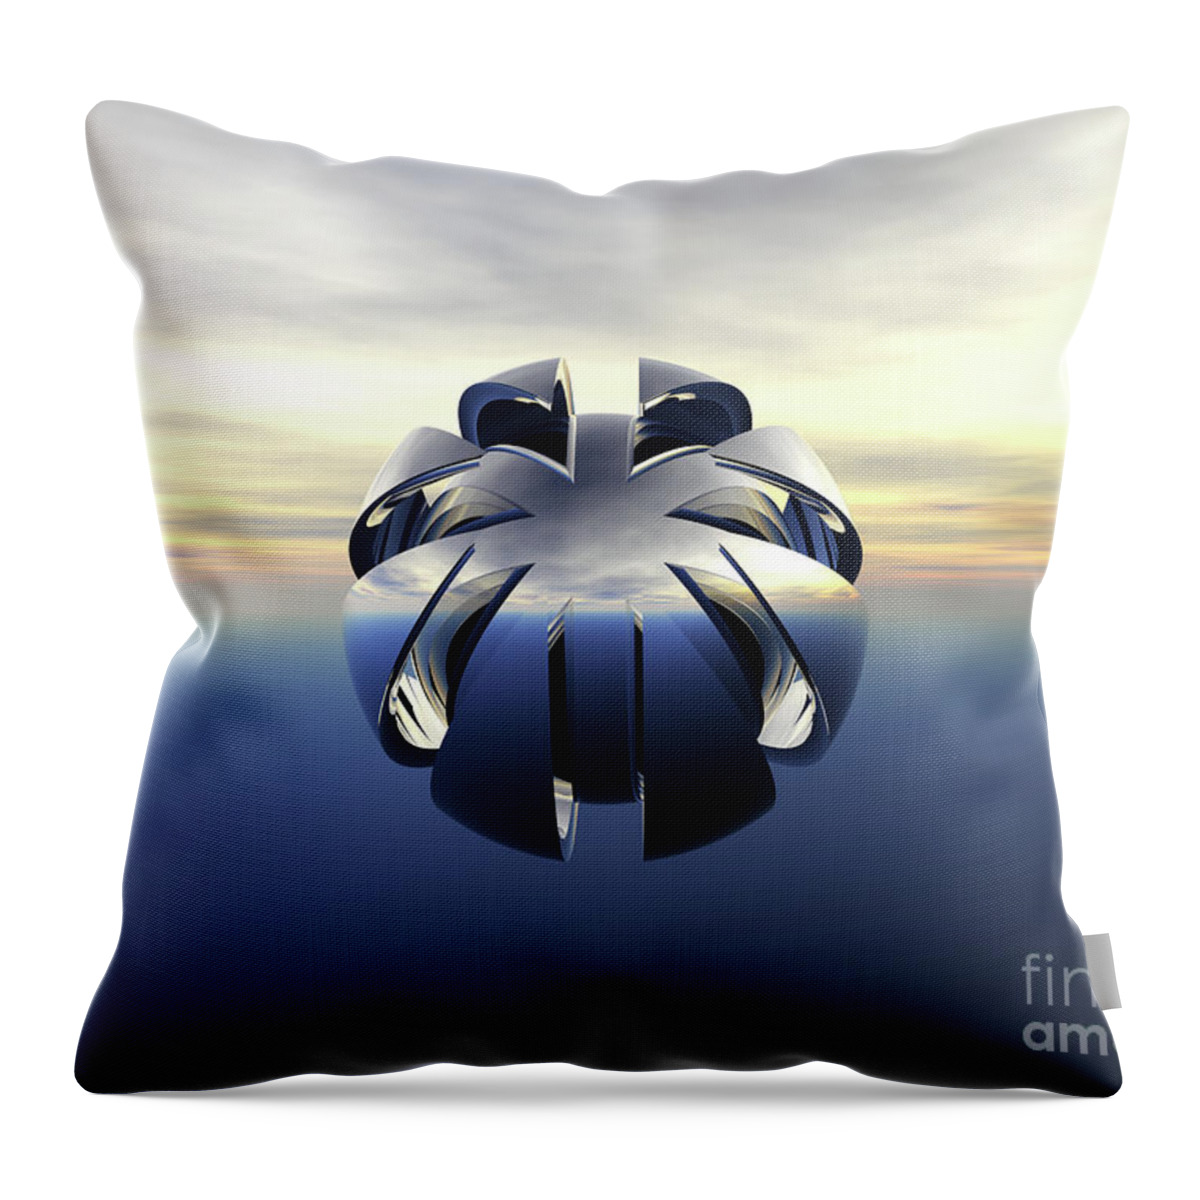 Space Throw Pillow featuring the digital art Unidentified Flying Object by Phil Perkins